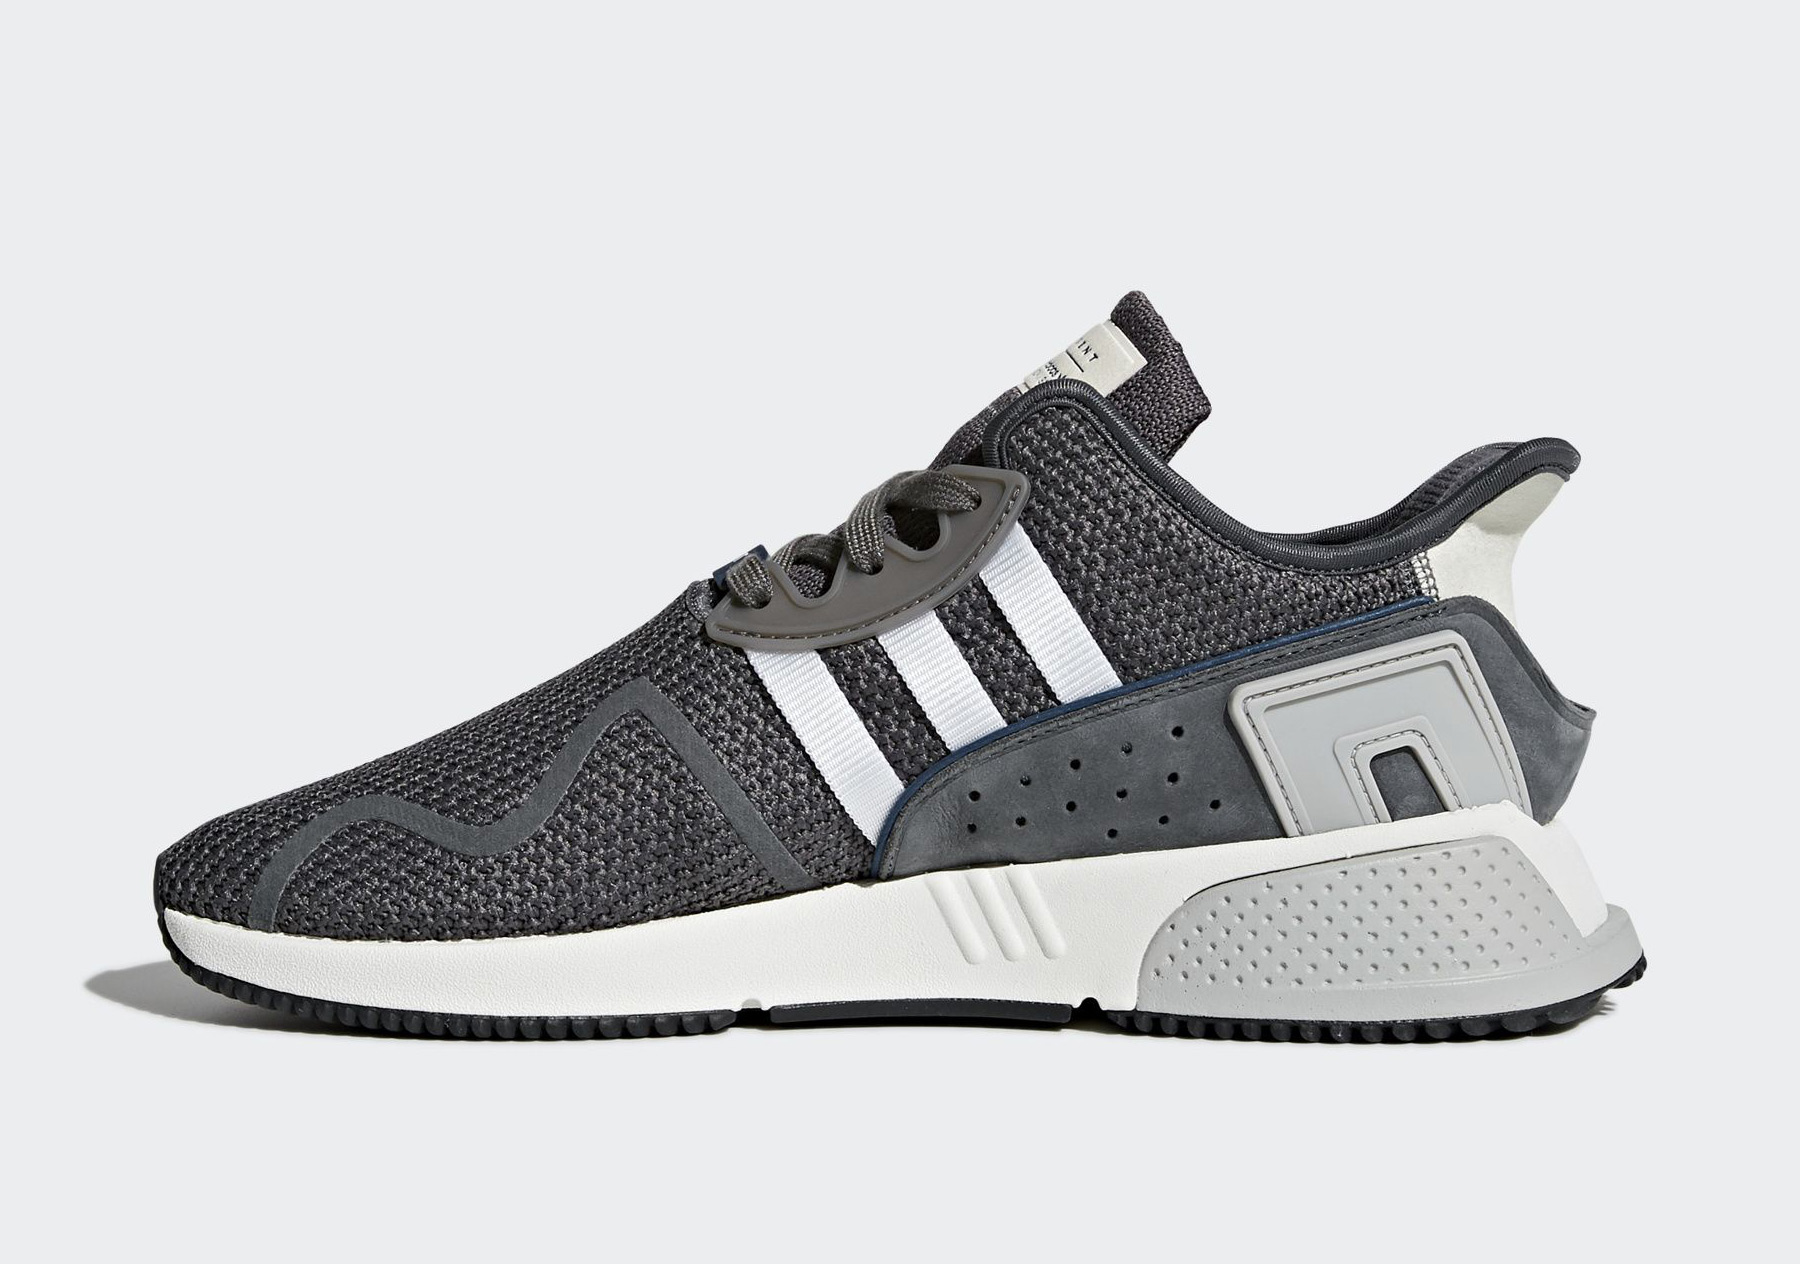 adidas EQT Cushion ADV Releases Coming On December 6th - Release ...